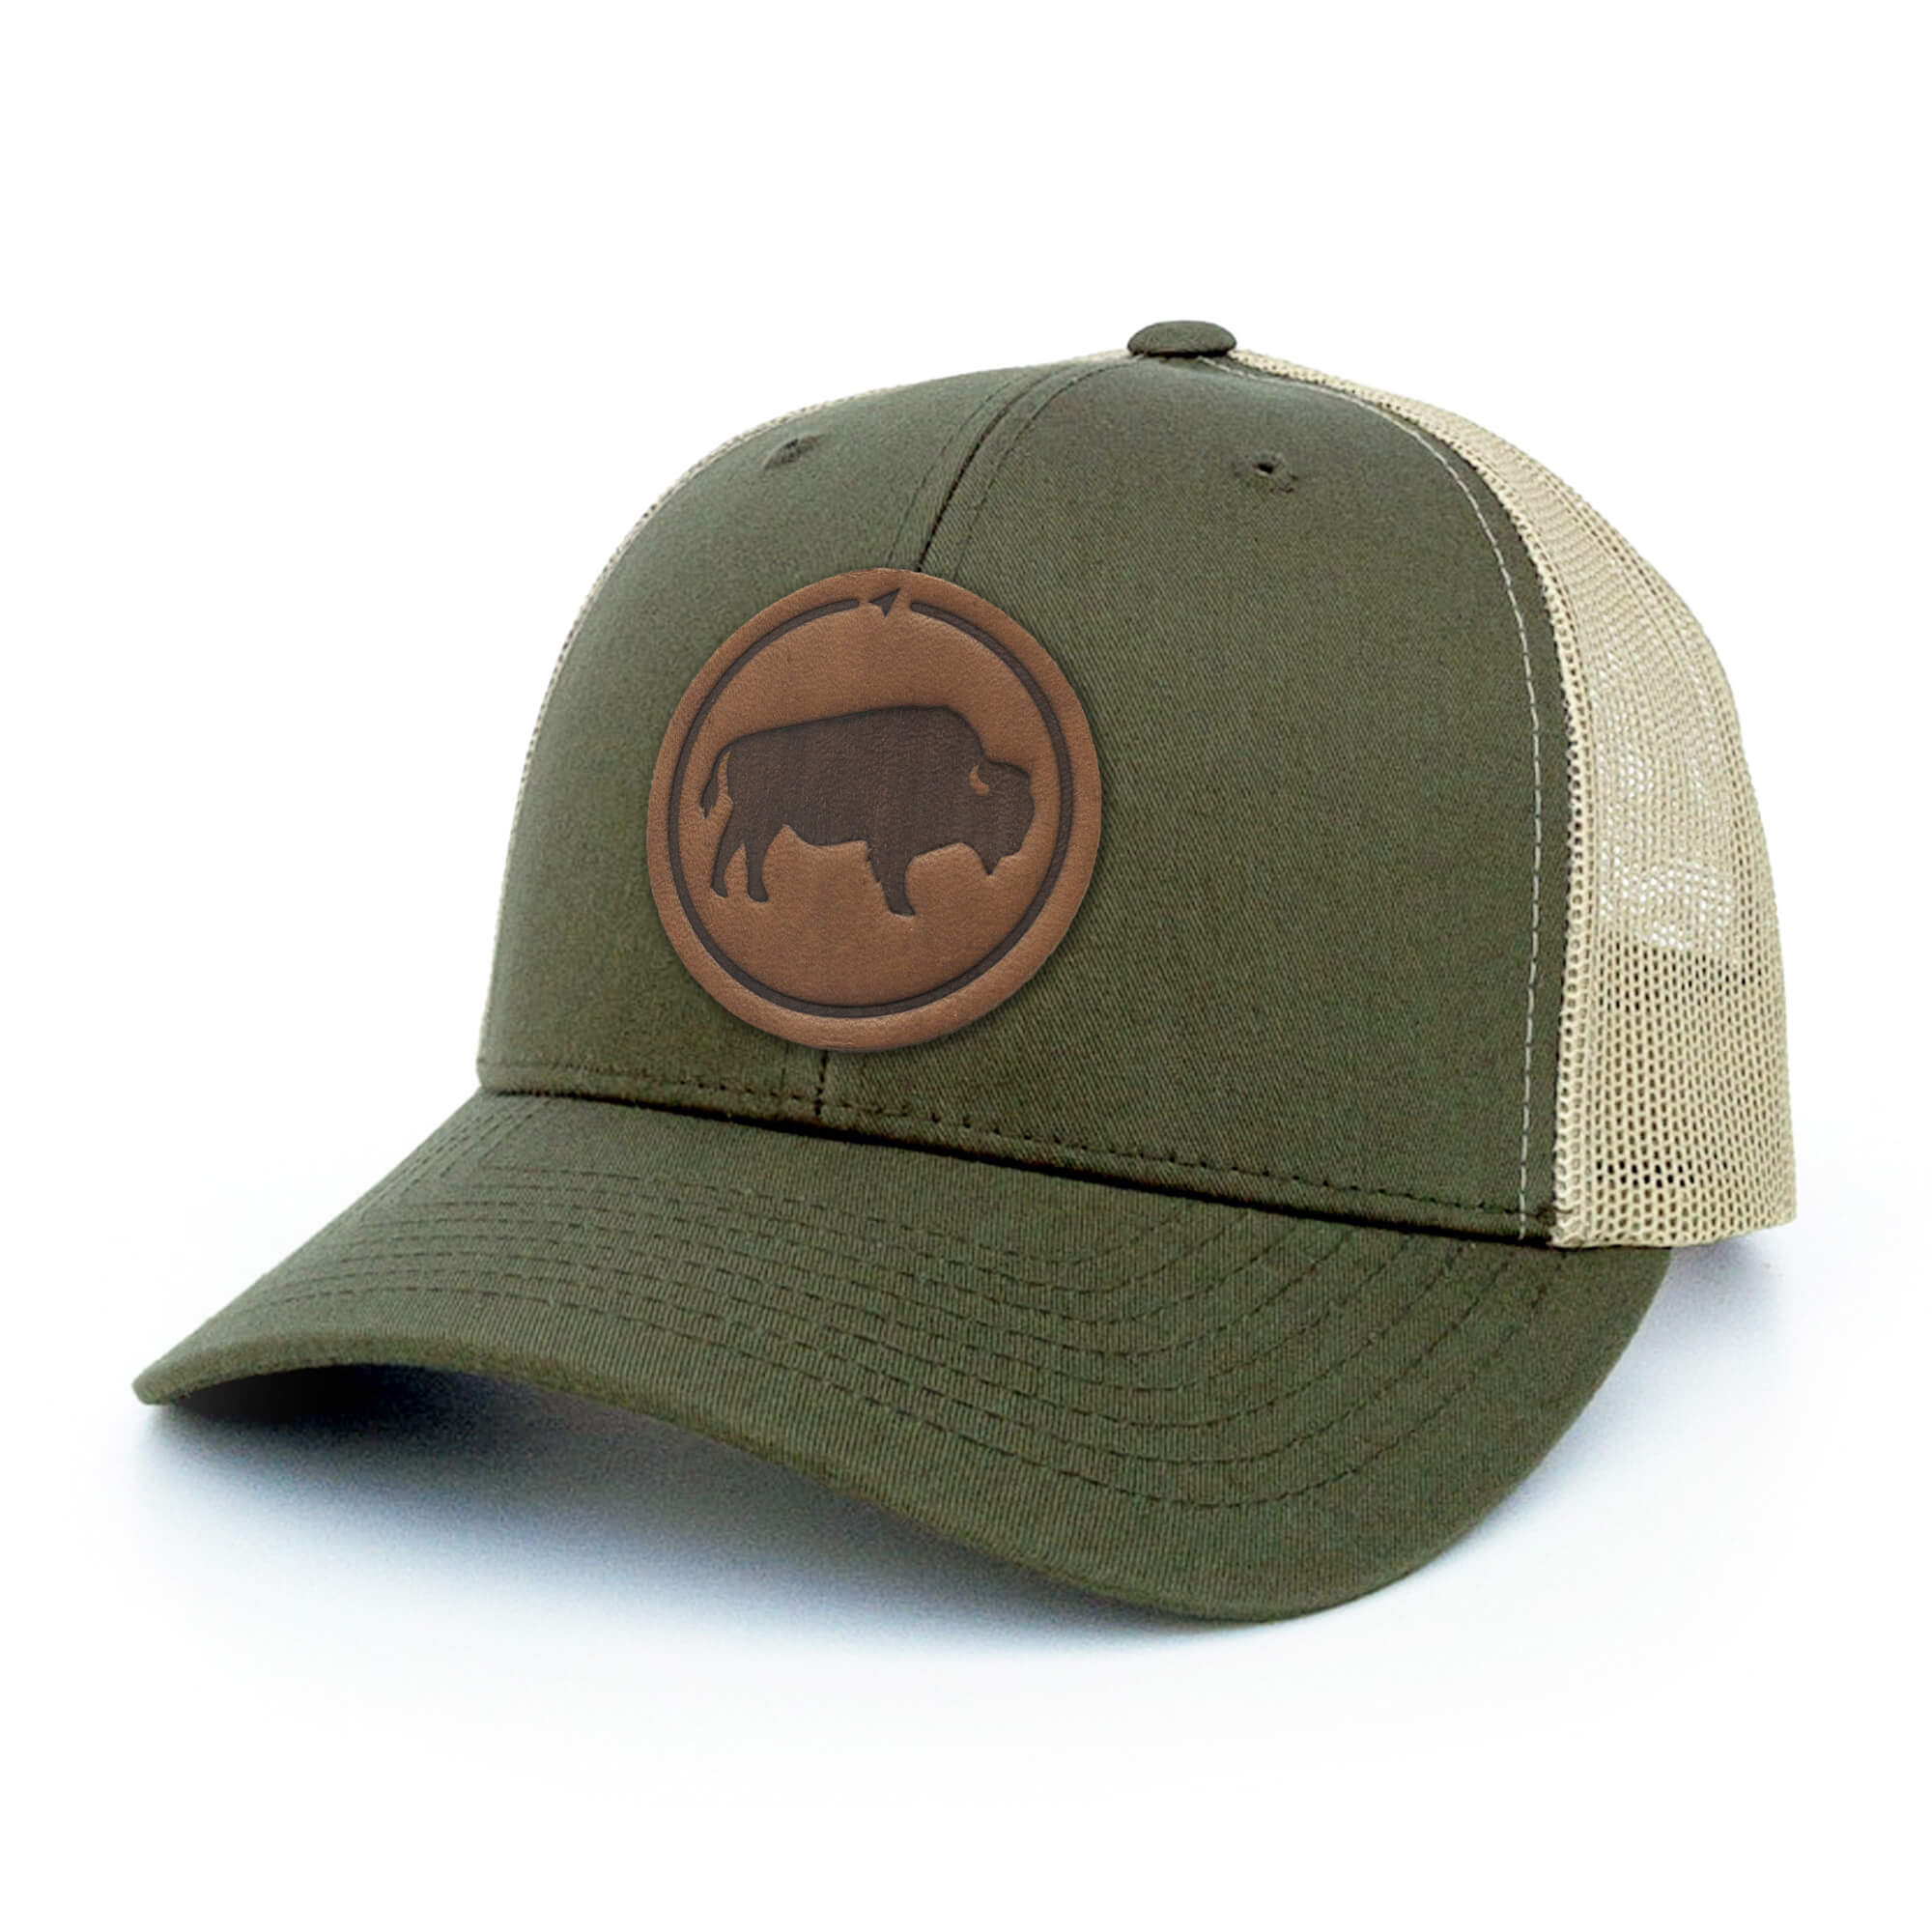 Moss Green and khaki trucker hat with full-grain leather patch of Bison | BLACK-004-010, CHARC-004-010, NAVY-004-010, HGREY-004-010, MOSS-004-010, BROWN-004-010